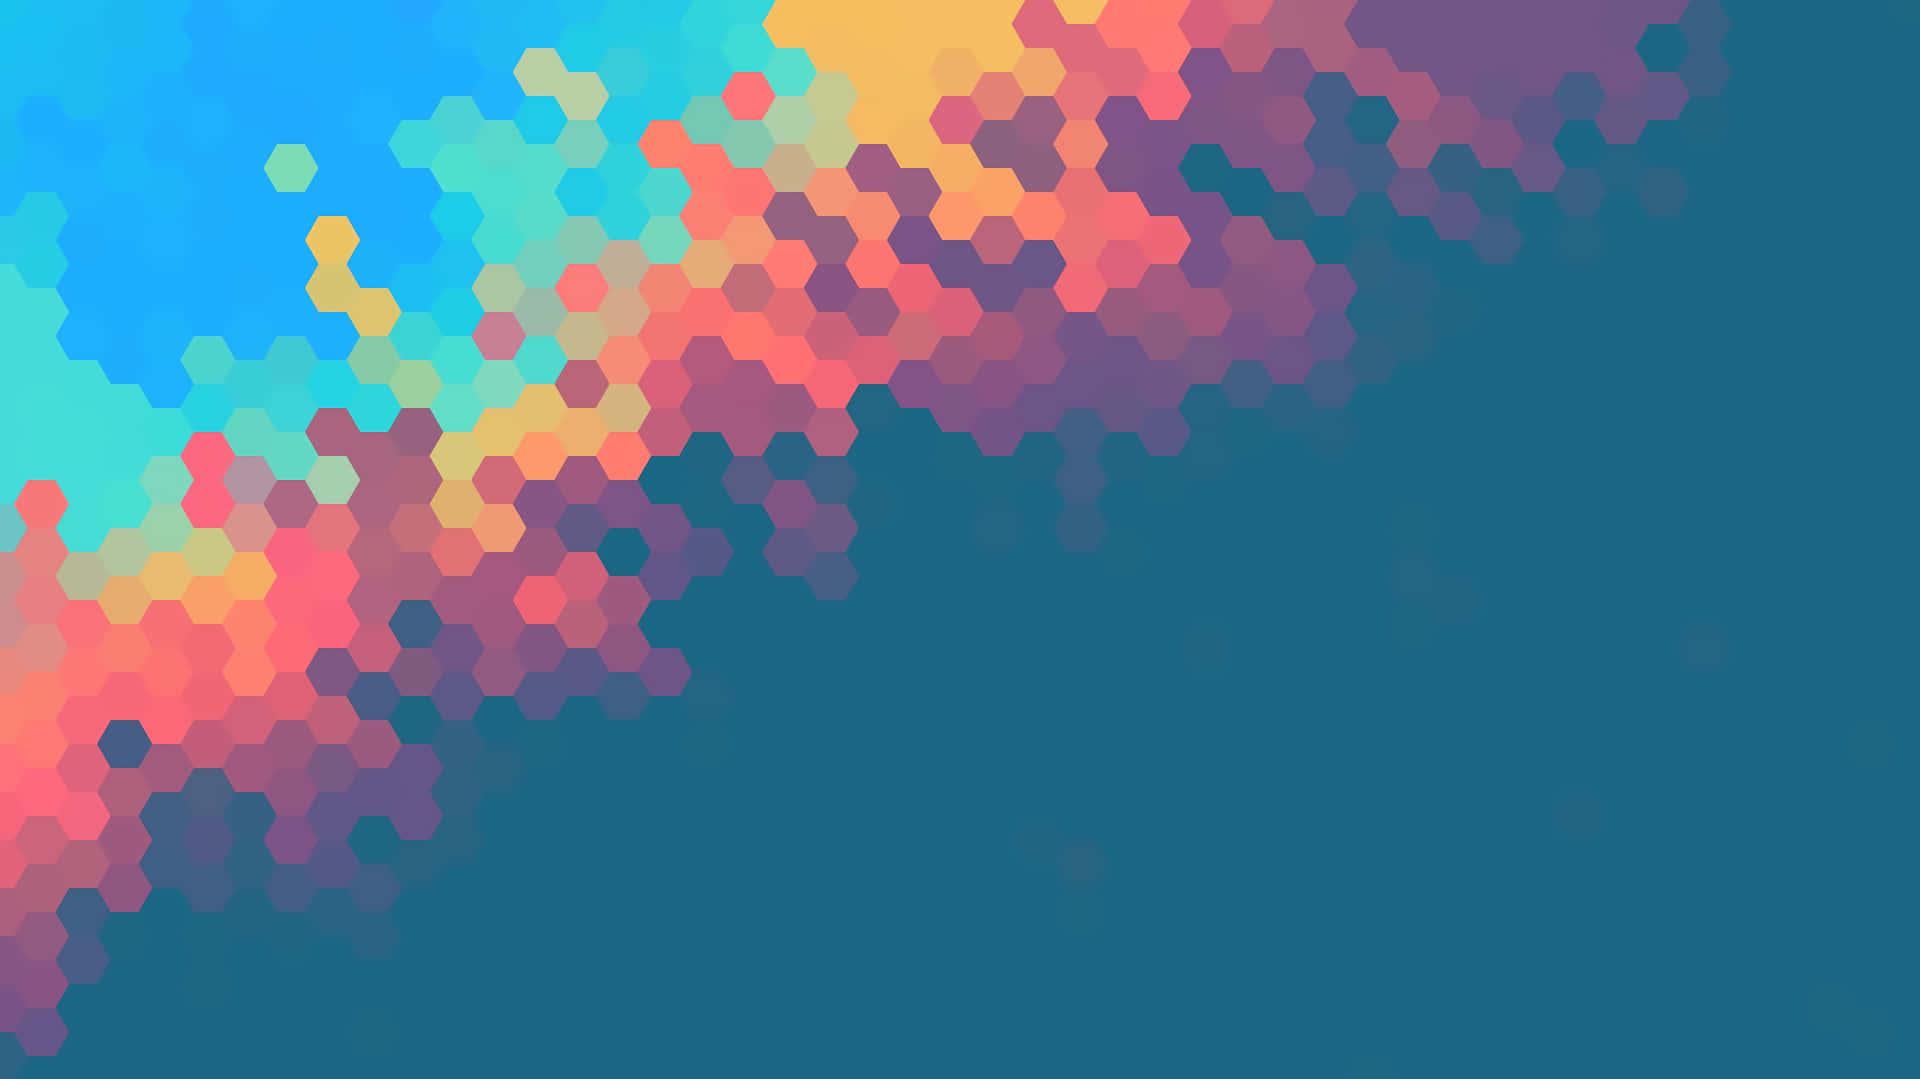 Minimalist Abstract Of Colorful Pixelated Wallpaper